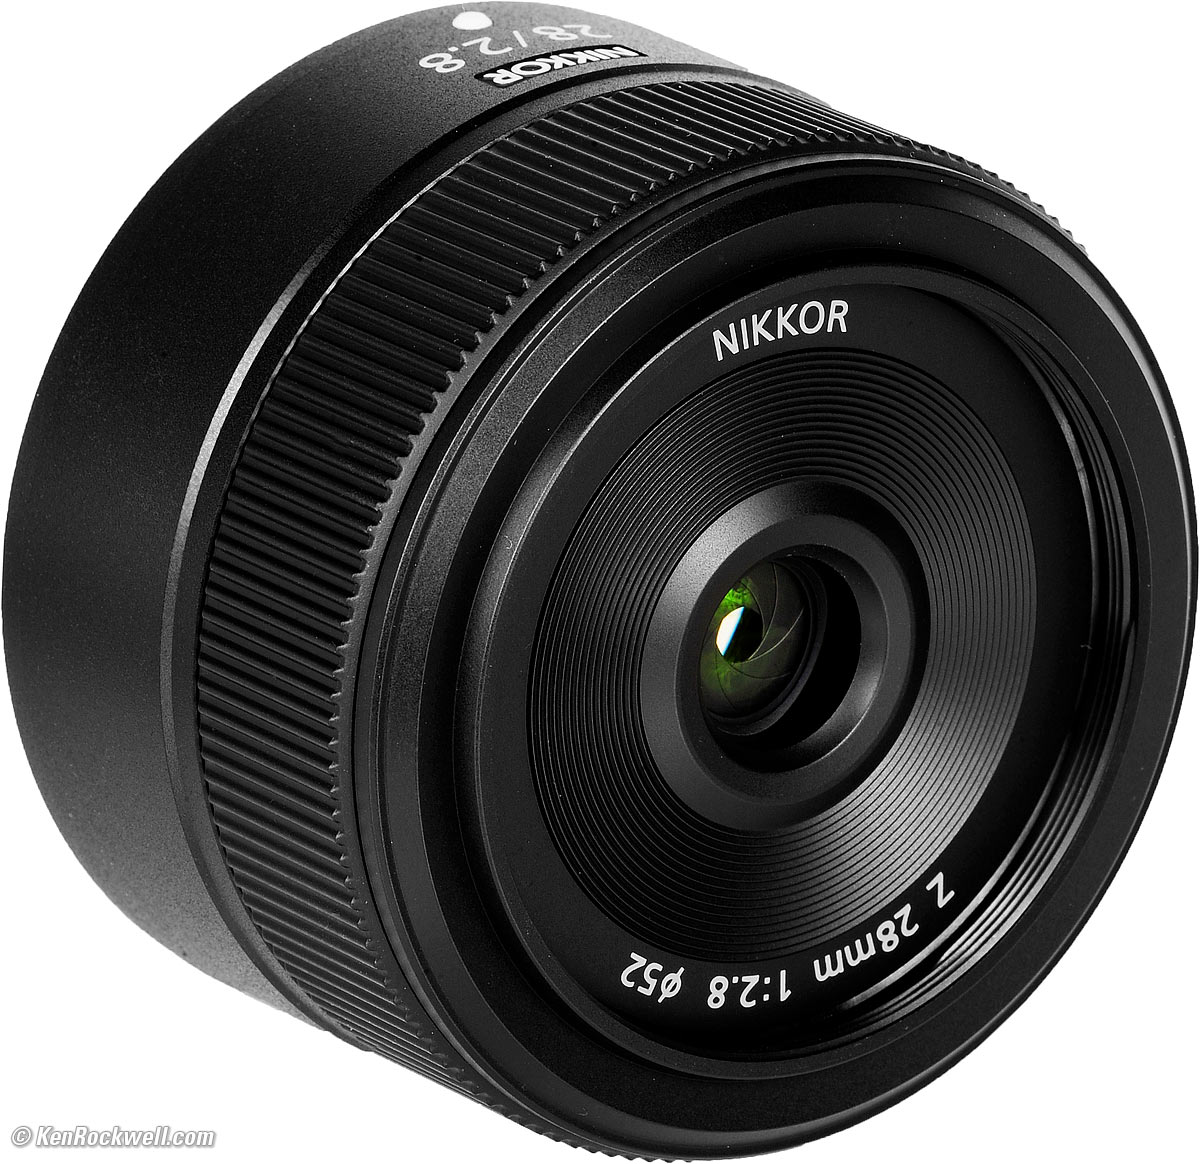 Nikon Z 28mm f/2.8 Review & Sample Images by Ken Rockwell